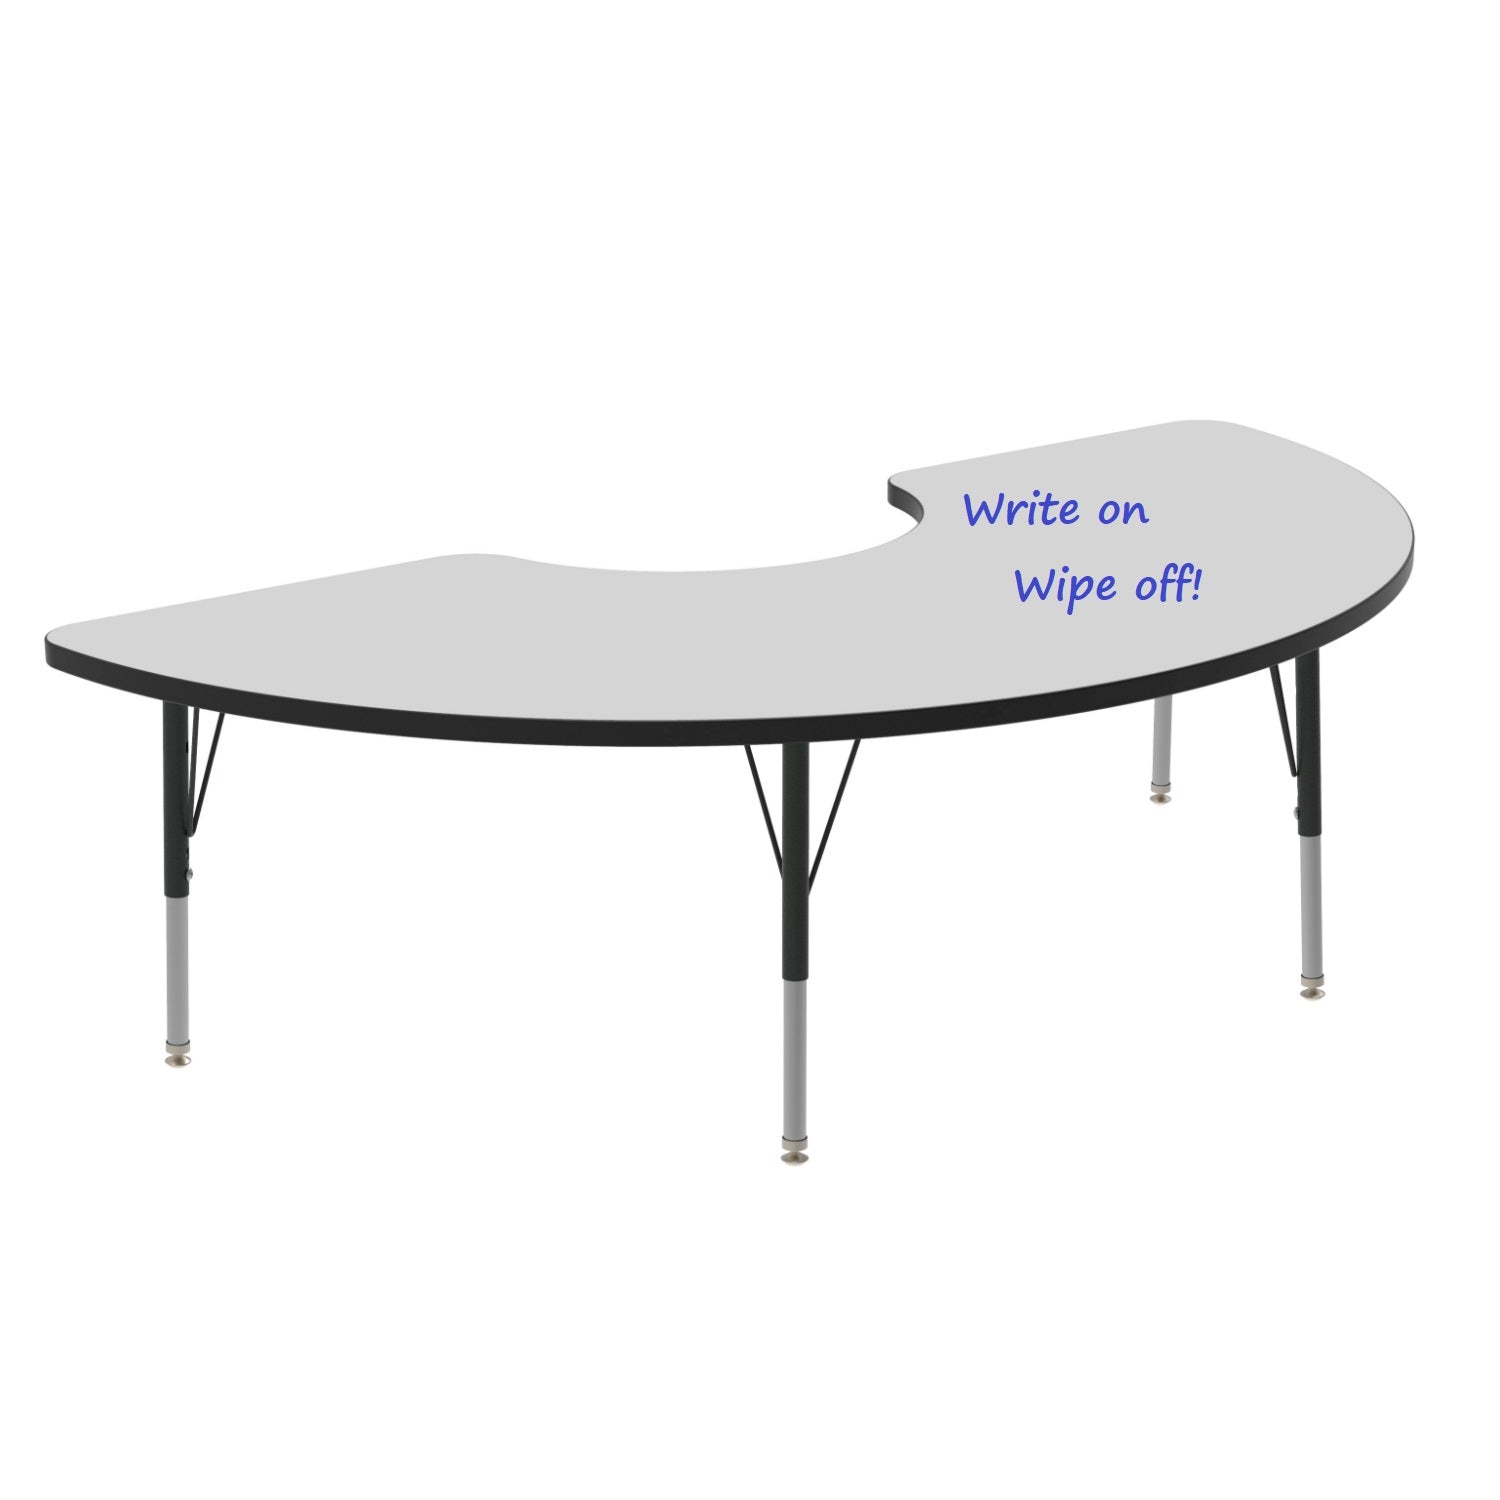 MG Series Adjustable Height Activity Table with White Dry Erase Markerboard Top, 36" x 72" Half Moon